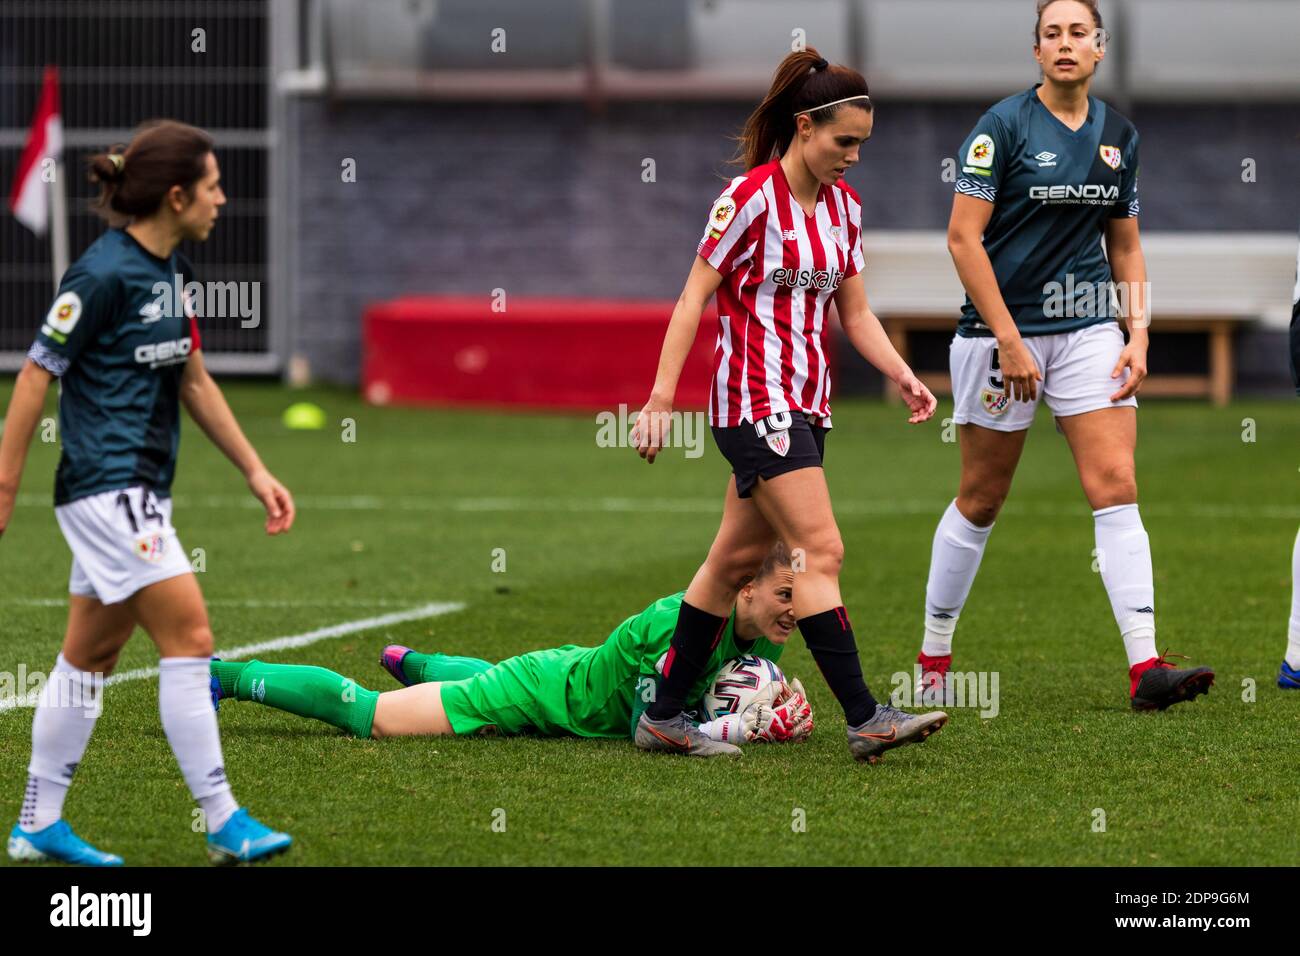 Bilbao, Basque Country, SPAIN. 19th Dec, 2020. PATRICIA LARQUE (1) Rayo Vallecano's goalkeeper, with the ball during the Liga Iberdrola game between Athletic Club Women's and Rayo Vallecano Women's at Lezama stadium. Credit: Edu Del Fresno/ZUMA Wire/Alamy Live News Stock Photo